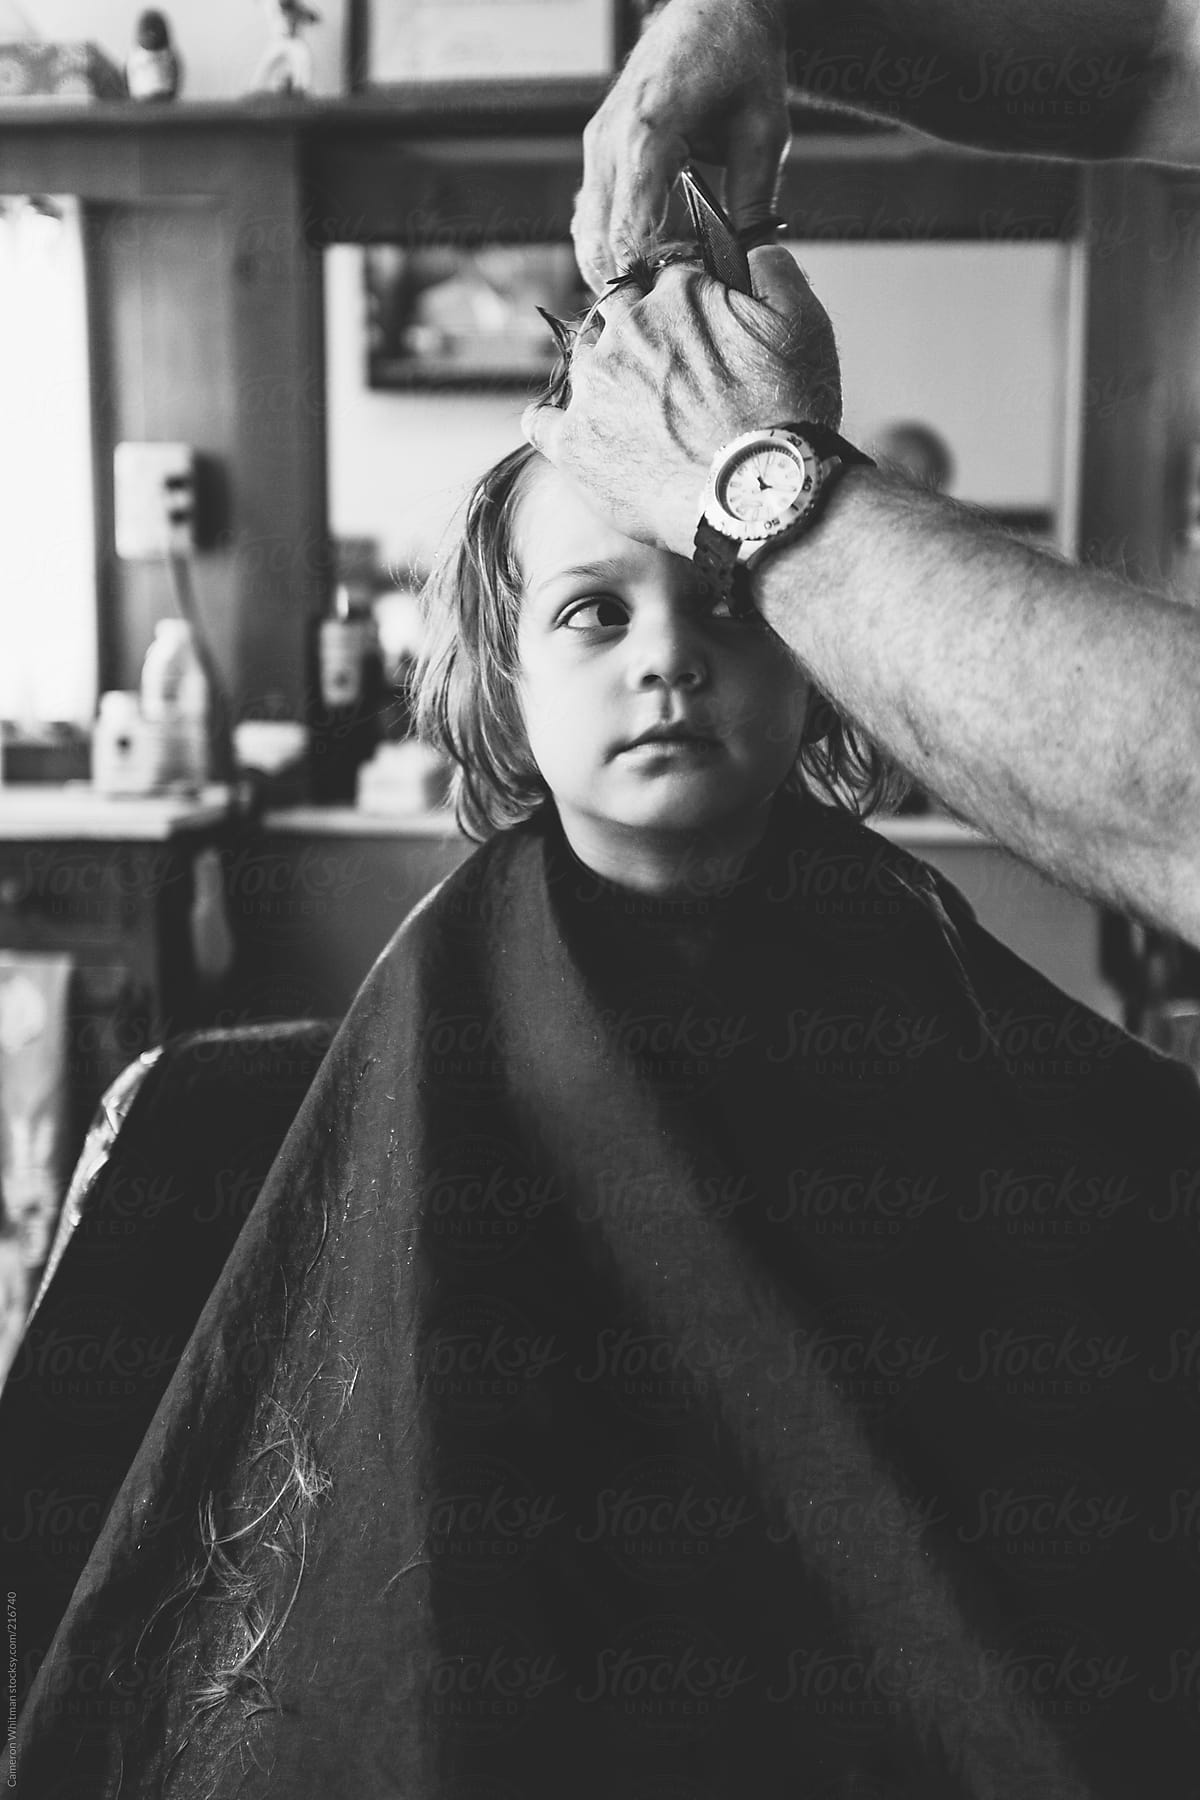 A young boy looking up suspiciously at barber during haircut